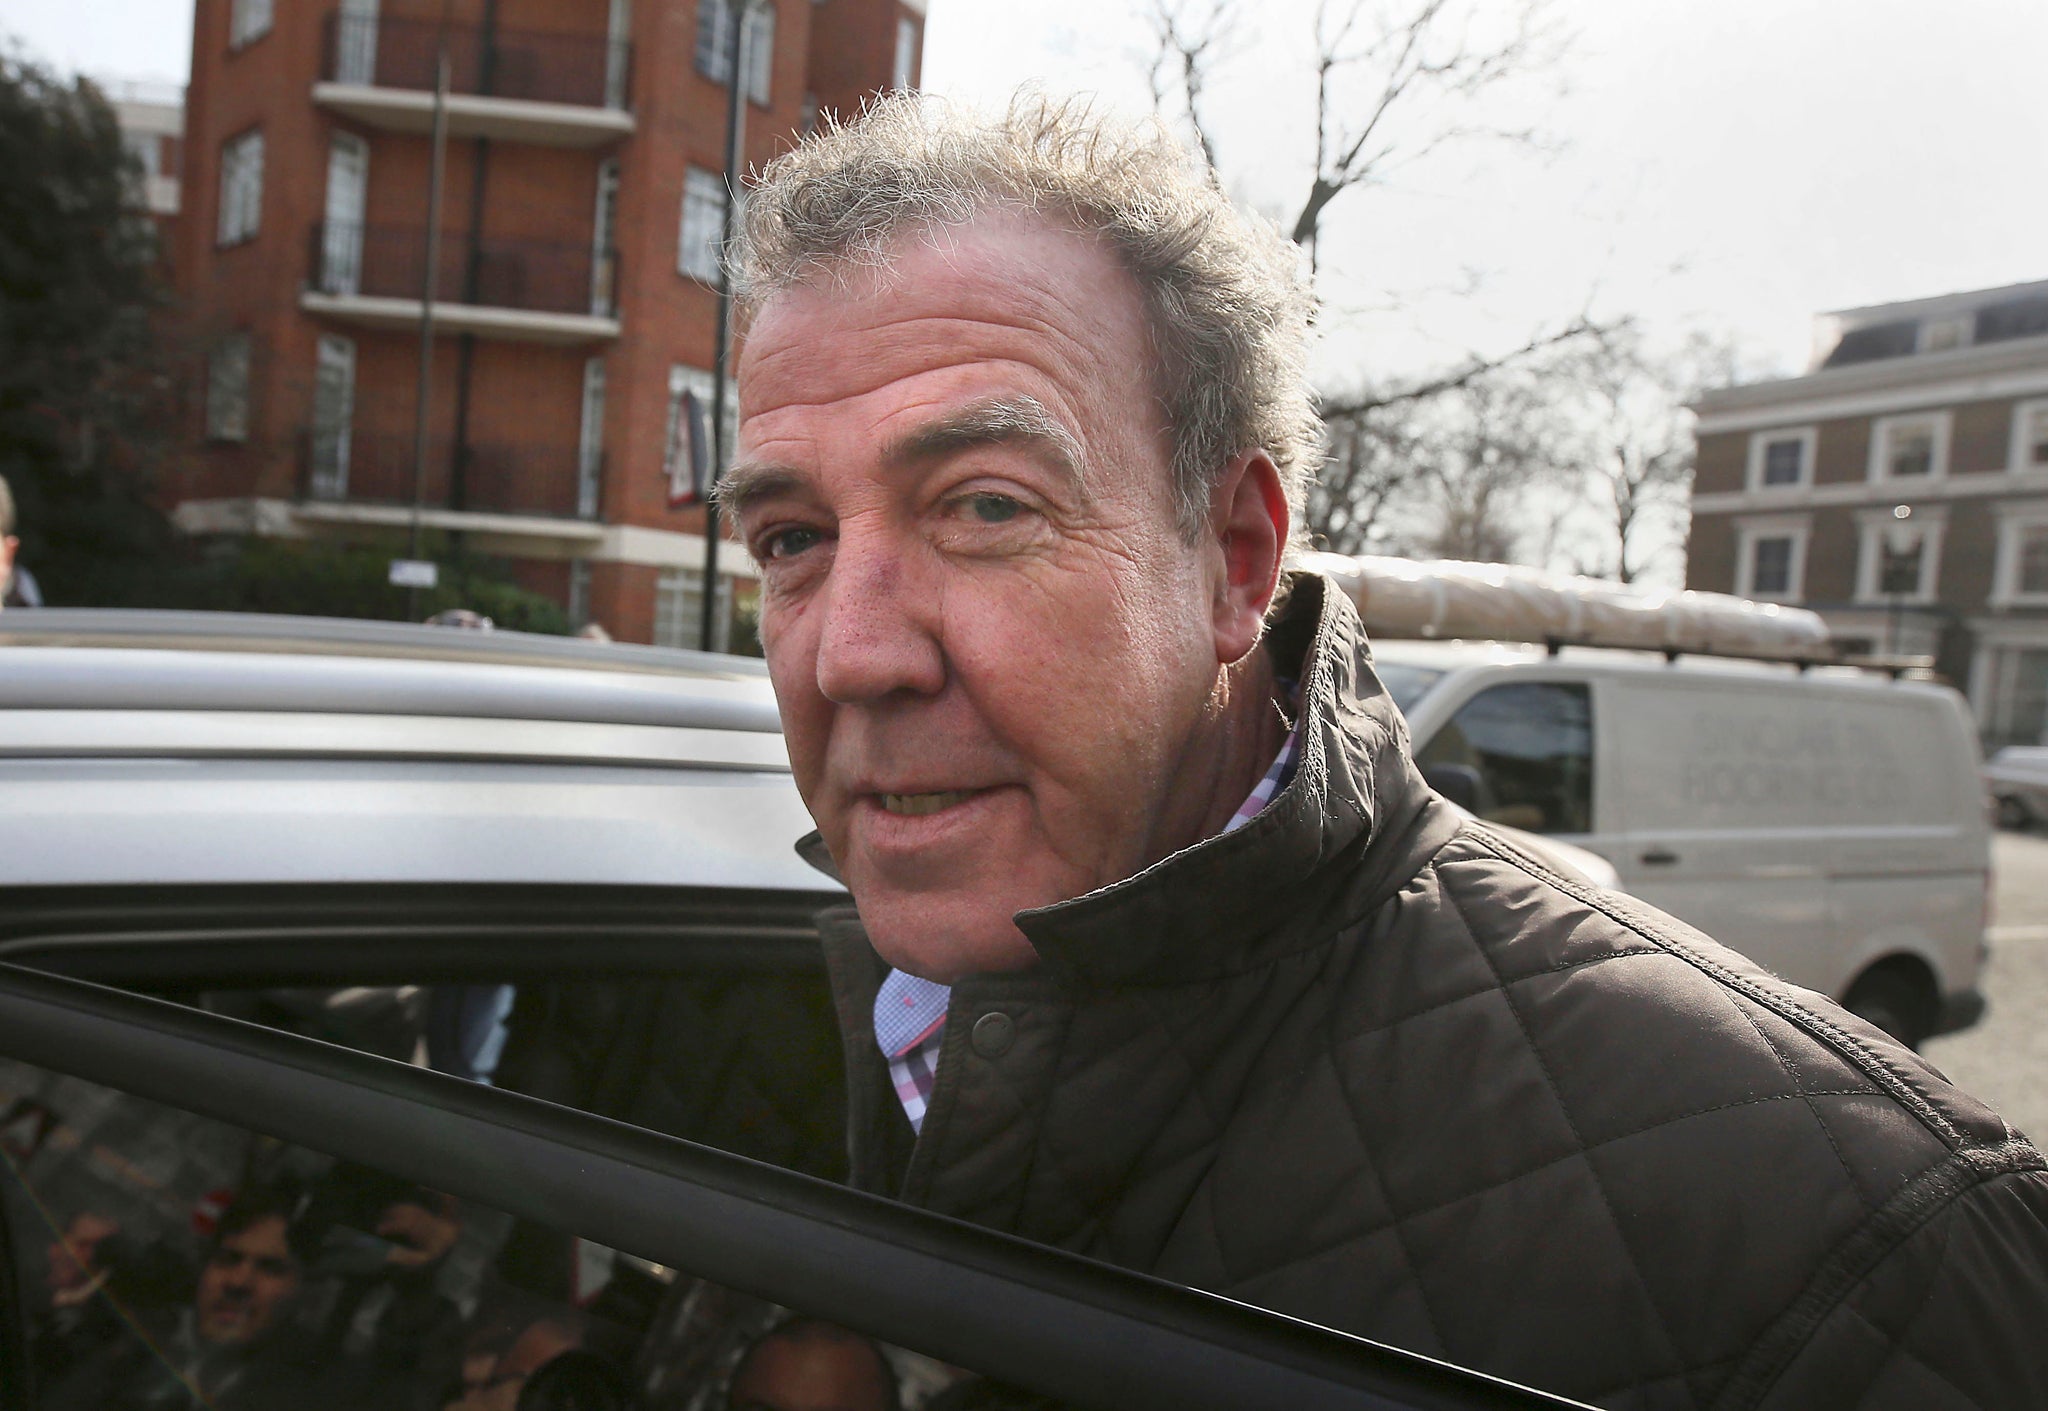 Jeremy Clarkson leaves his home in London, as he laughed off his latest controversy telling reporters he was 'just off to the job centre' after the BBC suspended him following a row with a Top Gear producer.